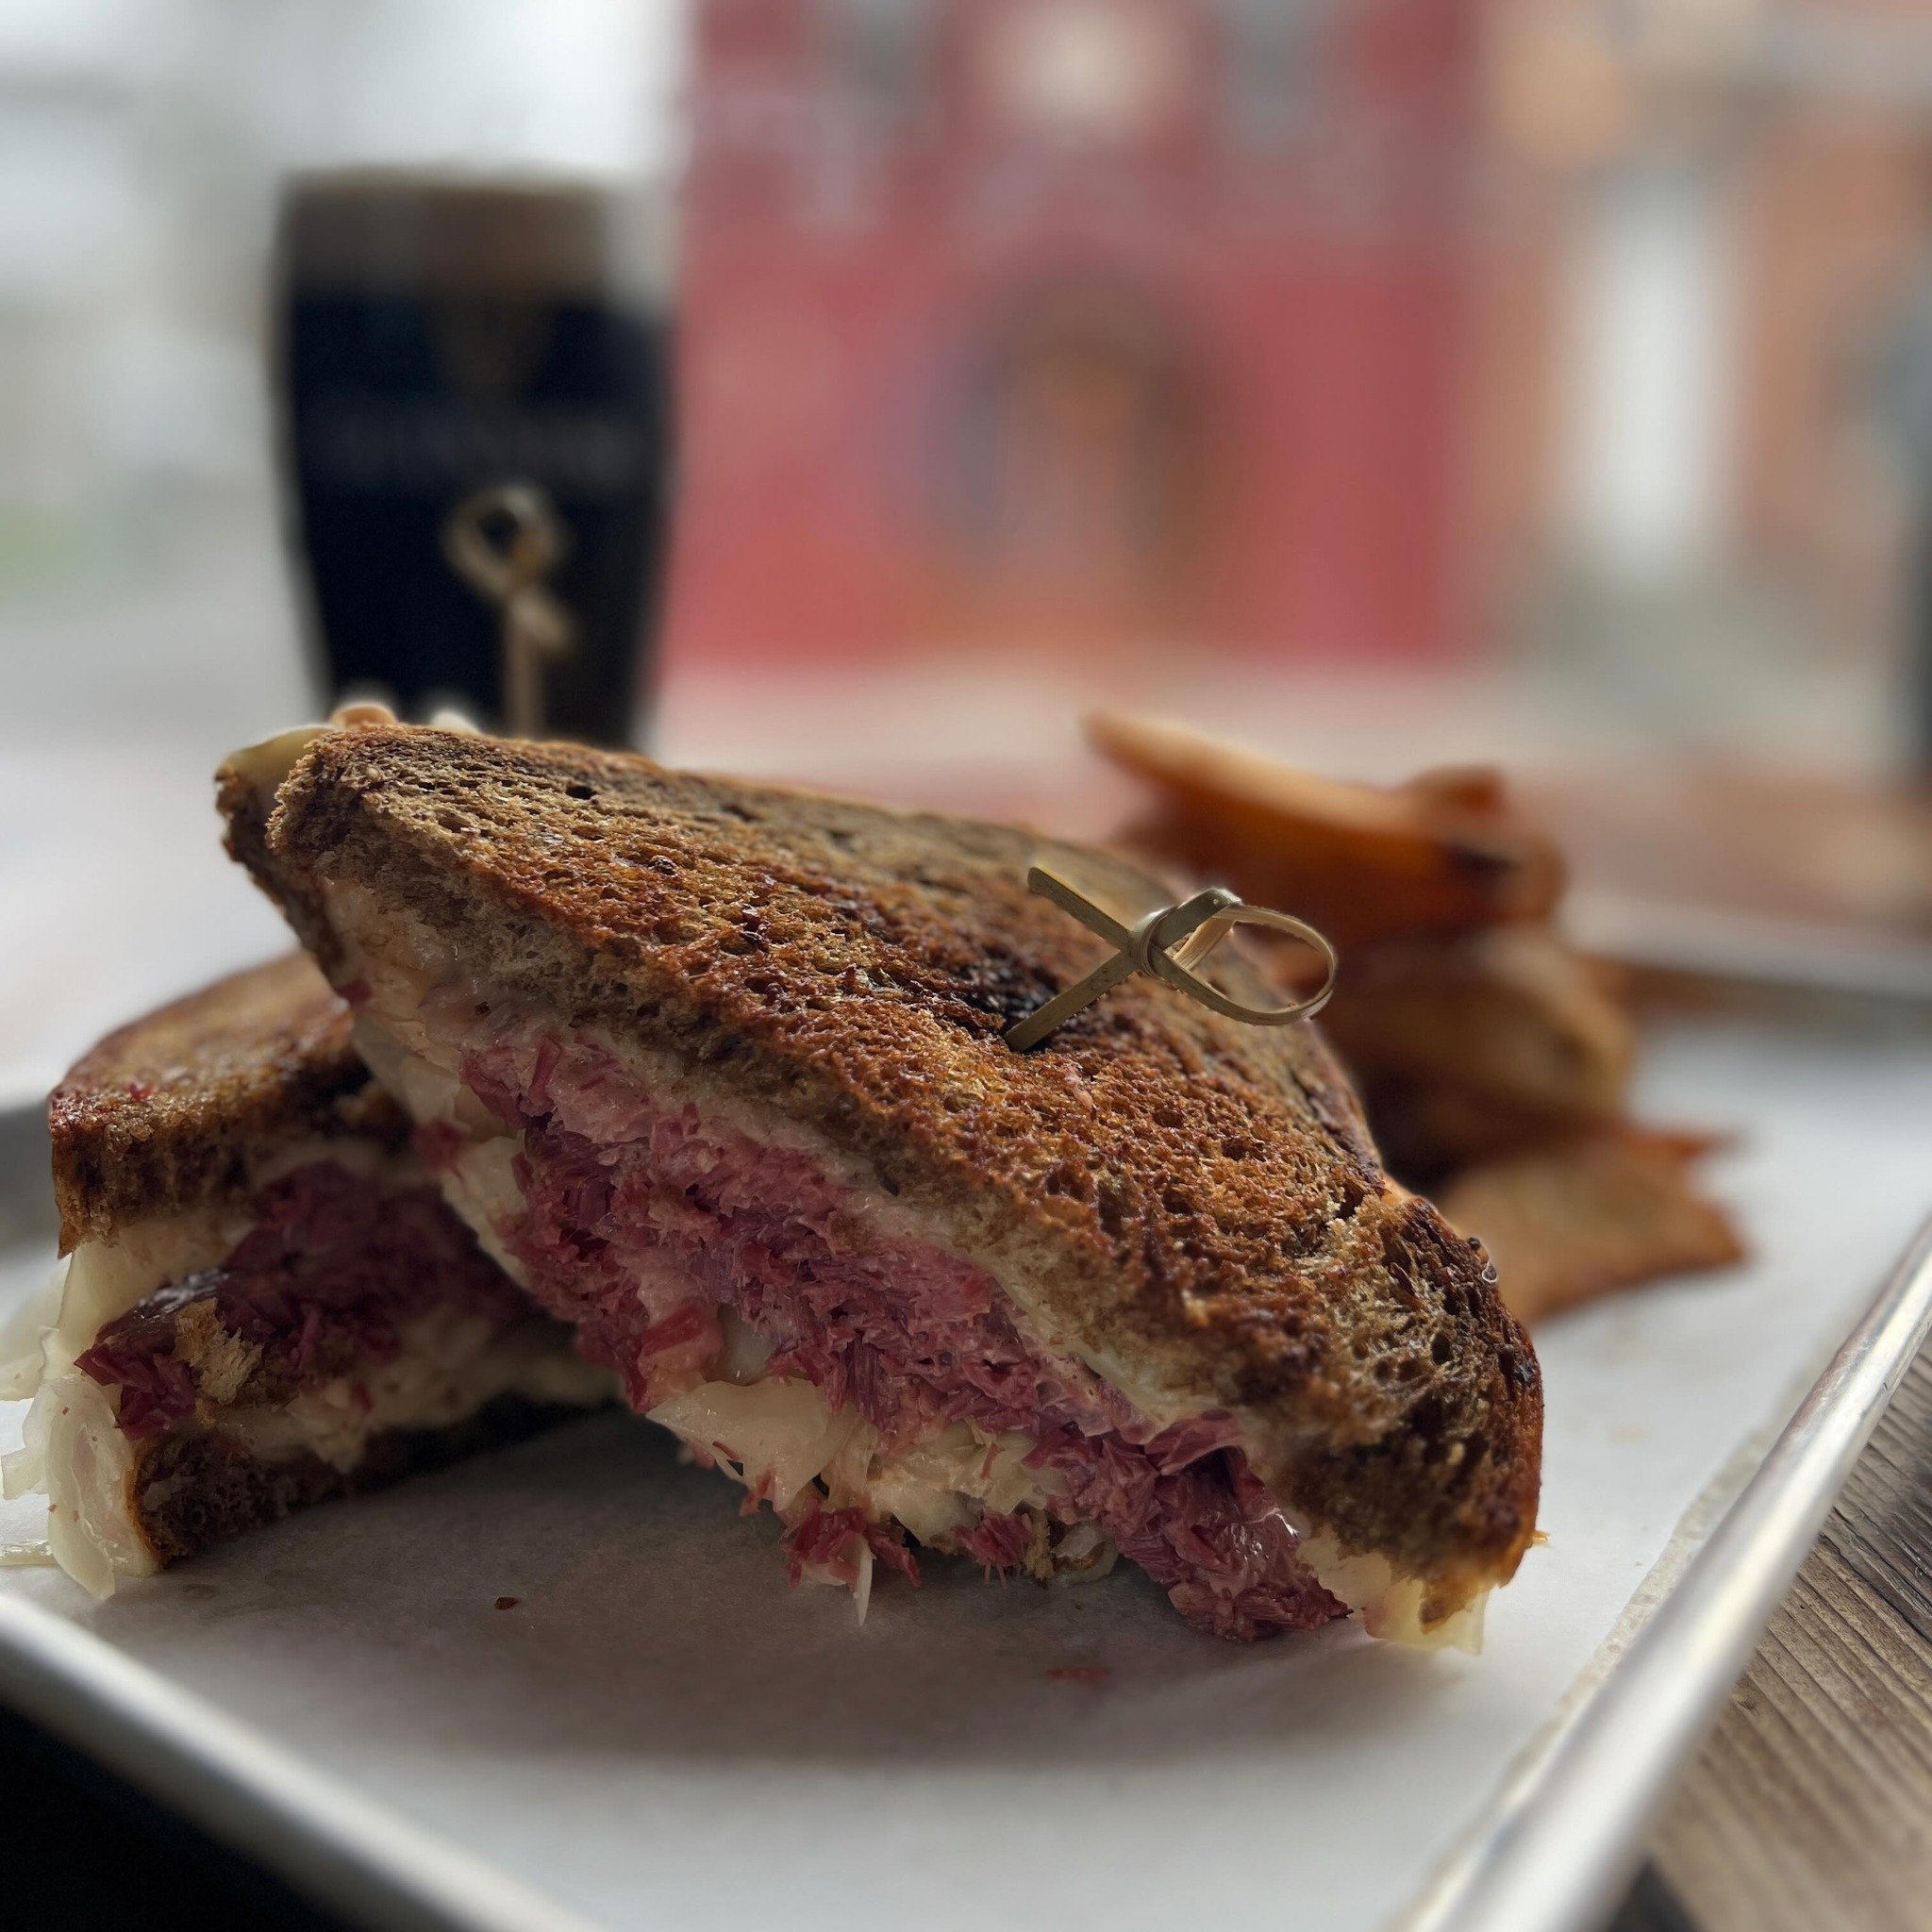 Featured all week:  Reuben with slow braised corned beef brisket, house made sauerkraut, Russian dressing on marble rye served with crispy potato wedges.  Enjoy it with a @guinness draught.